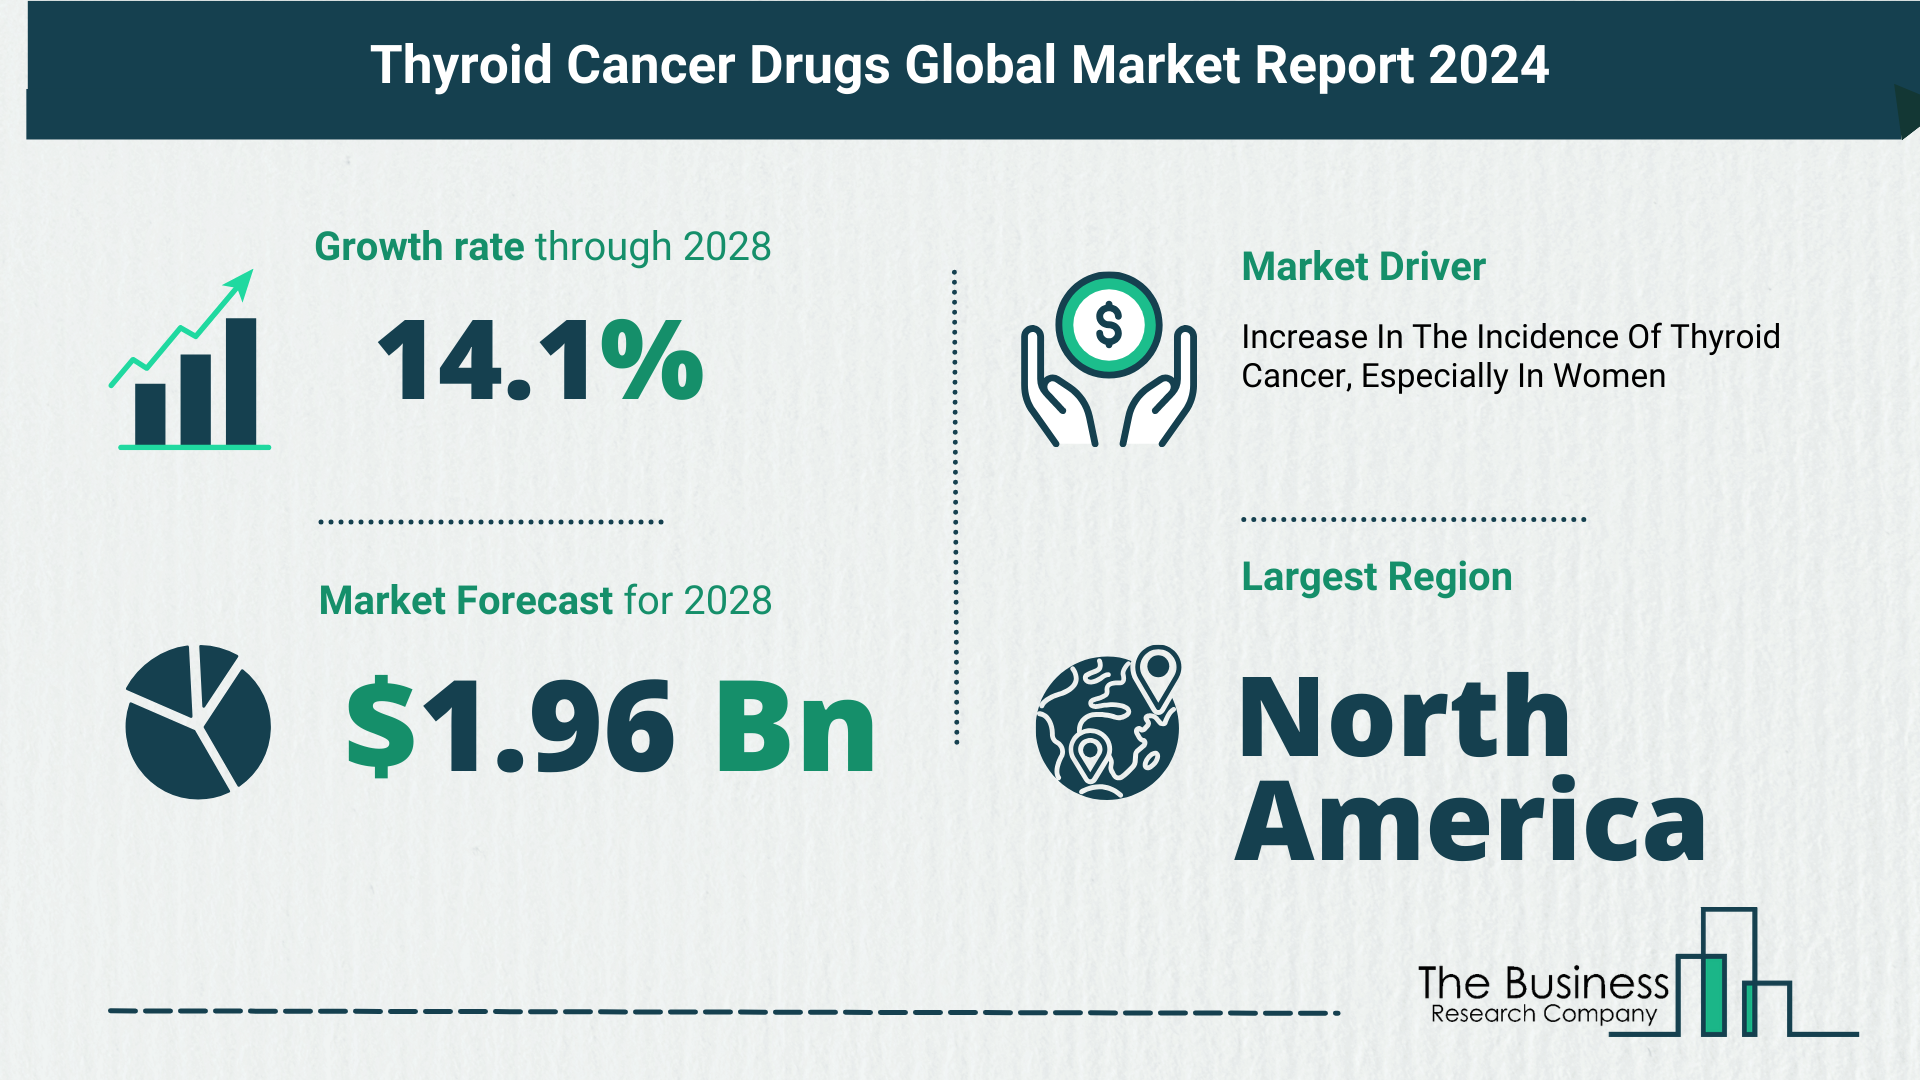 5 Key Insights On The Thyroid Cancer Drugs Market 2024